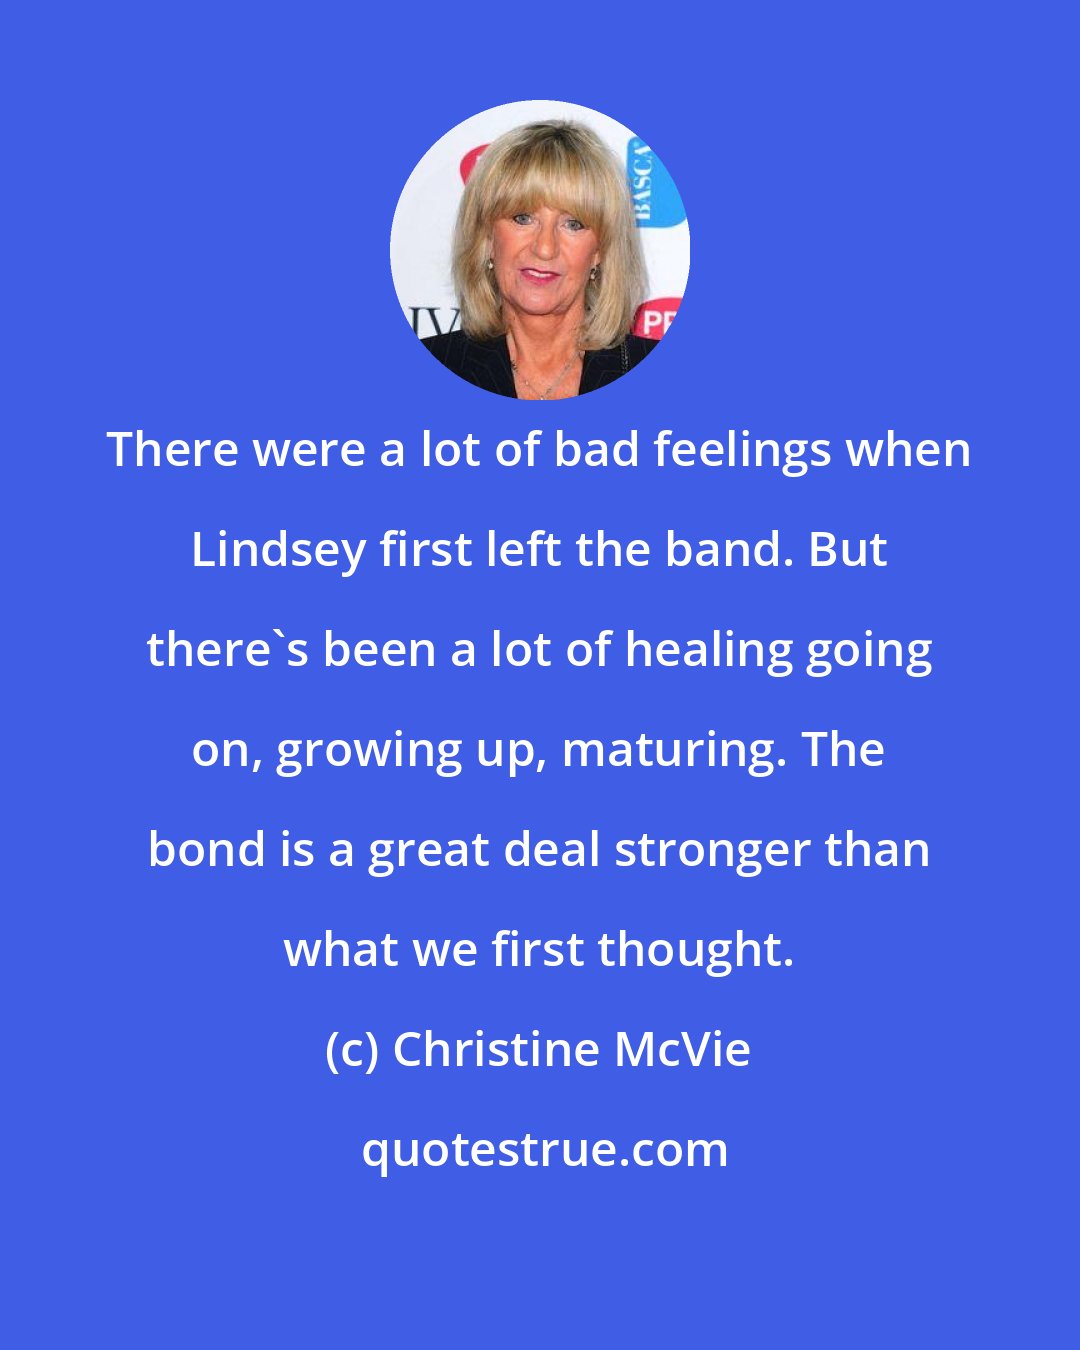 Christine McVie: There were a lot of bad feelings when Lindsey first left the band. But there's been a lot of healing going on, growing up, maturing. The bond is a great deal stronger than what we first thought.